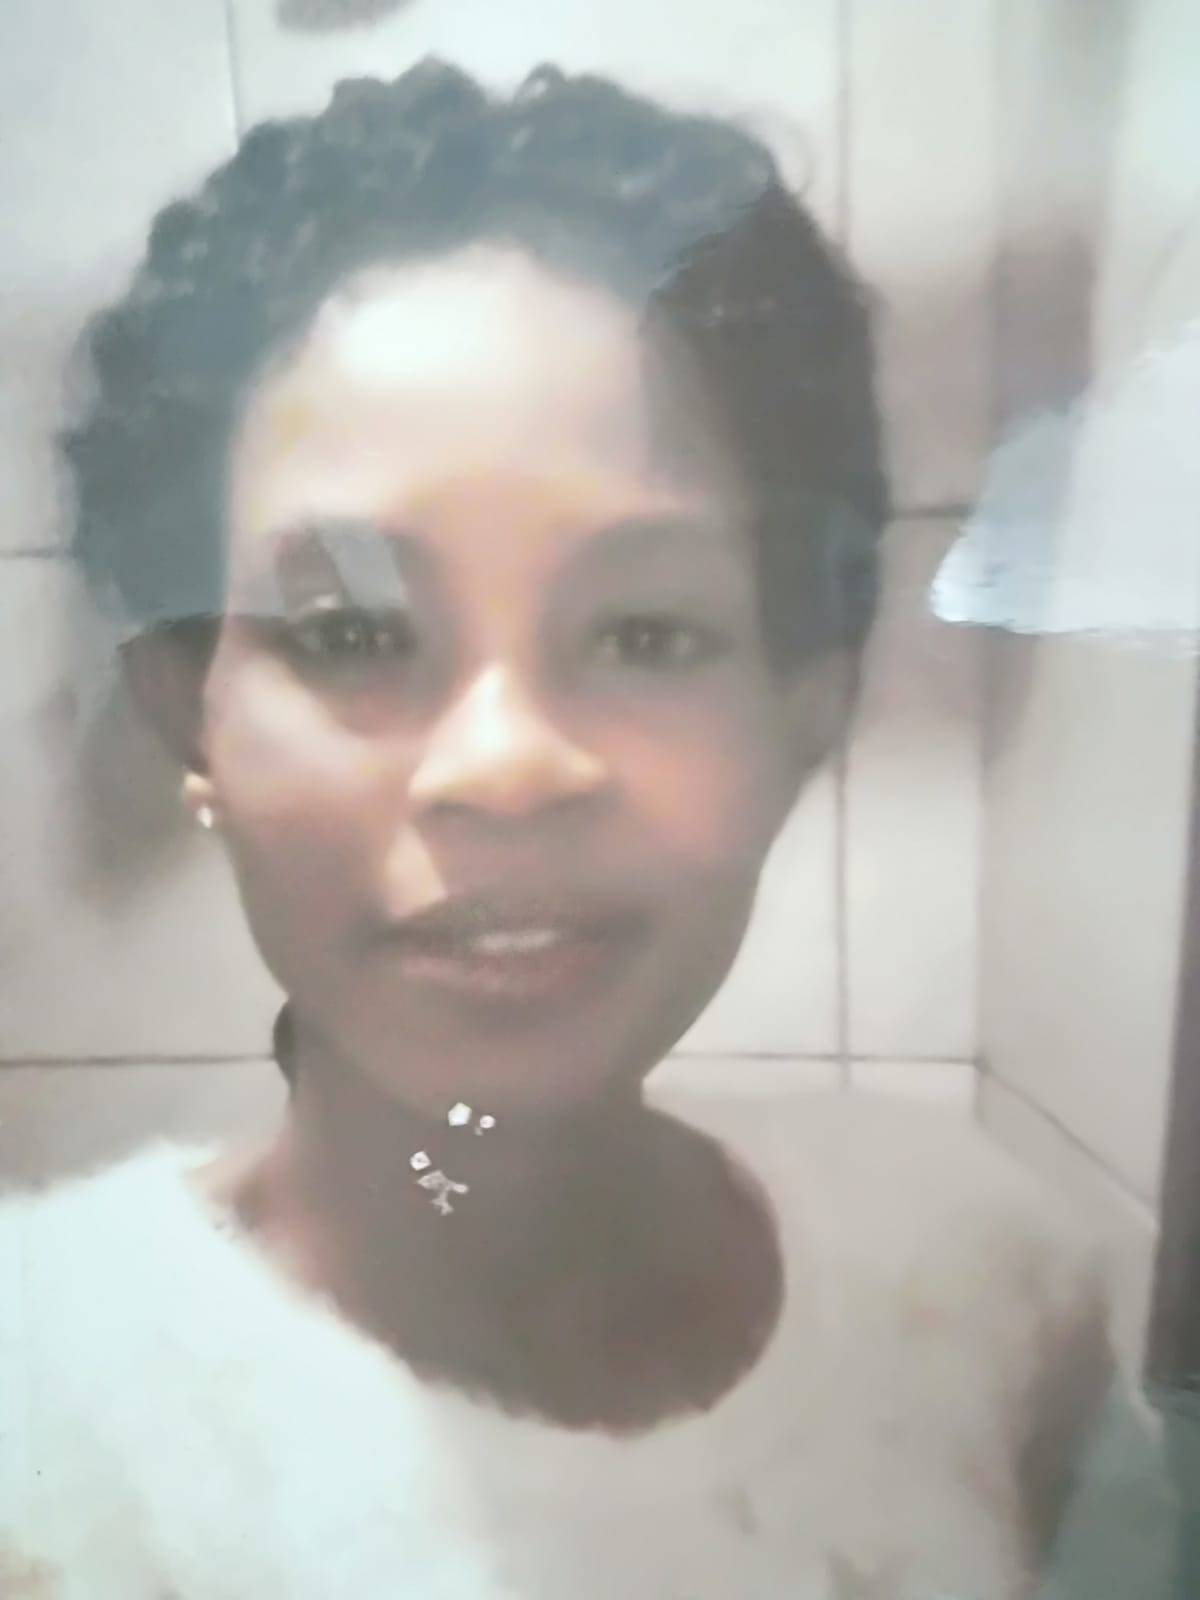 Police require public assistance to find missing woman